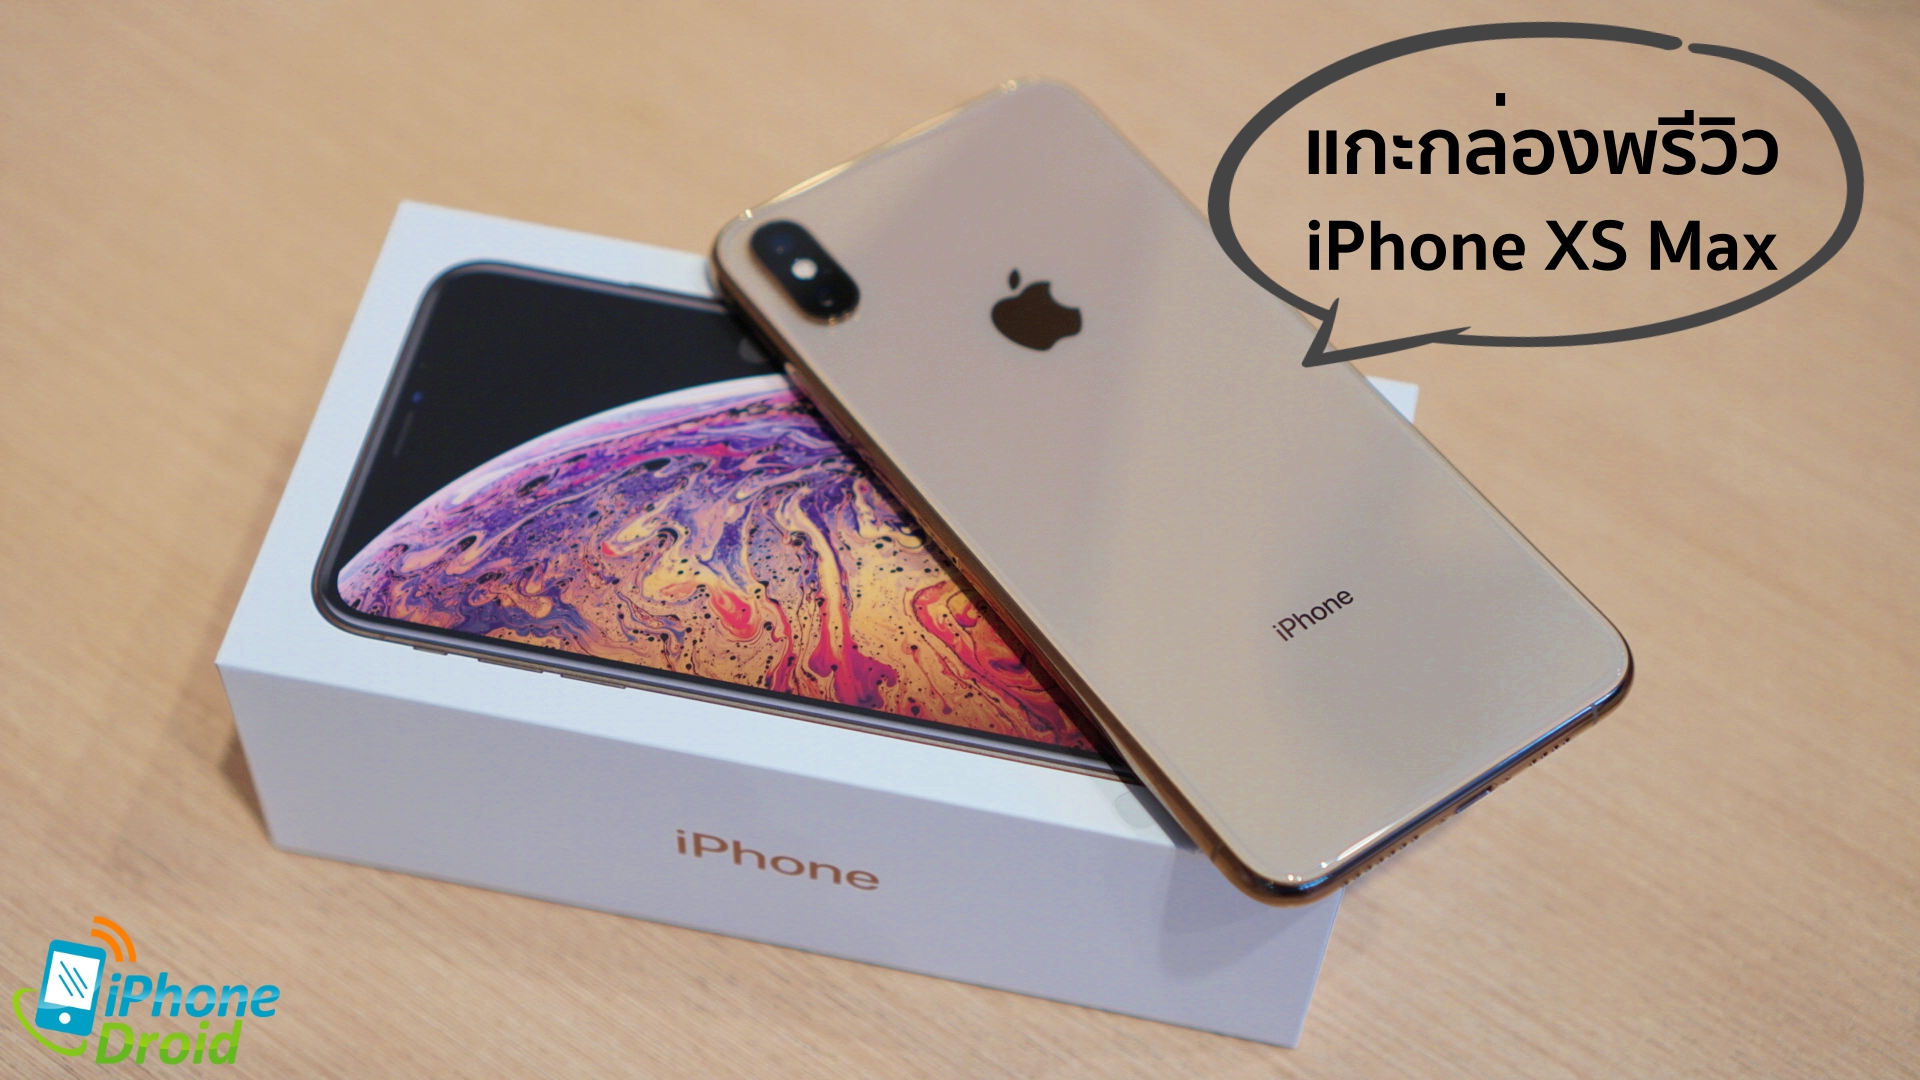 iPhone XS Max Unboxing